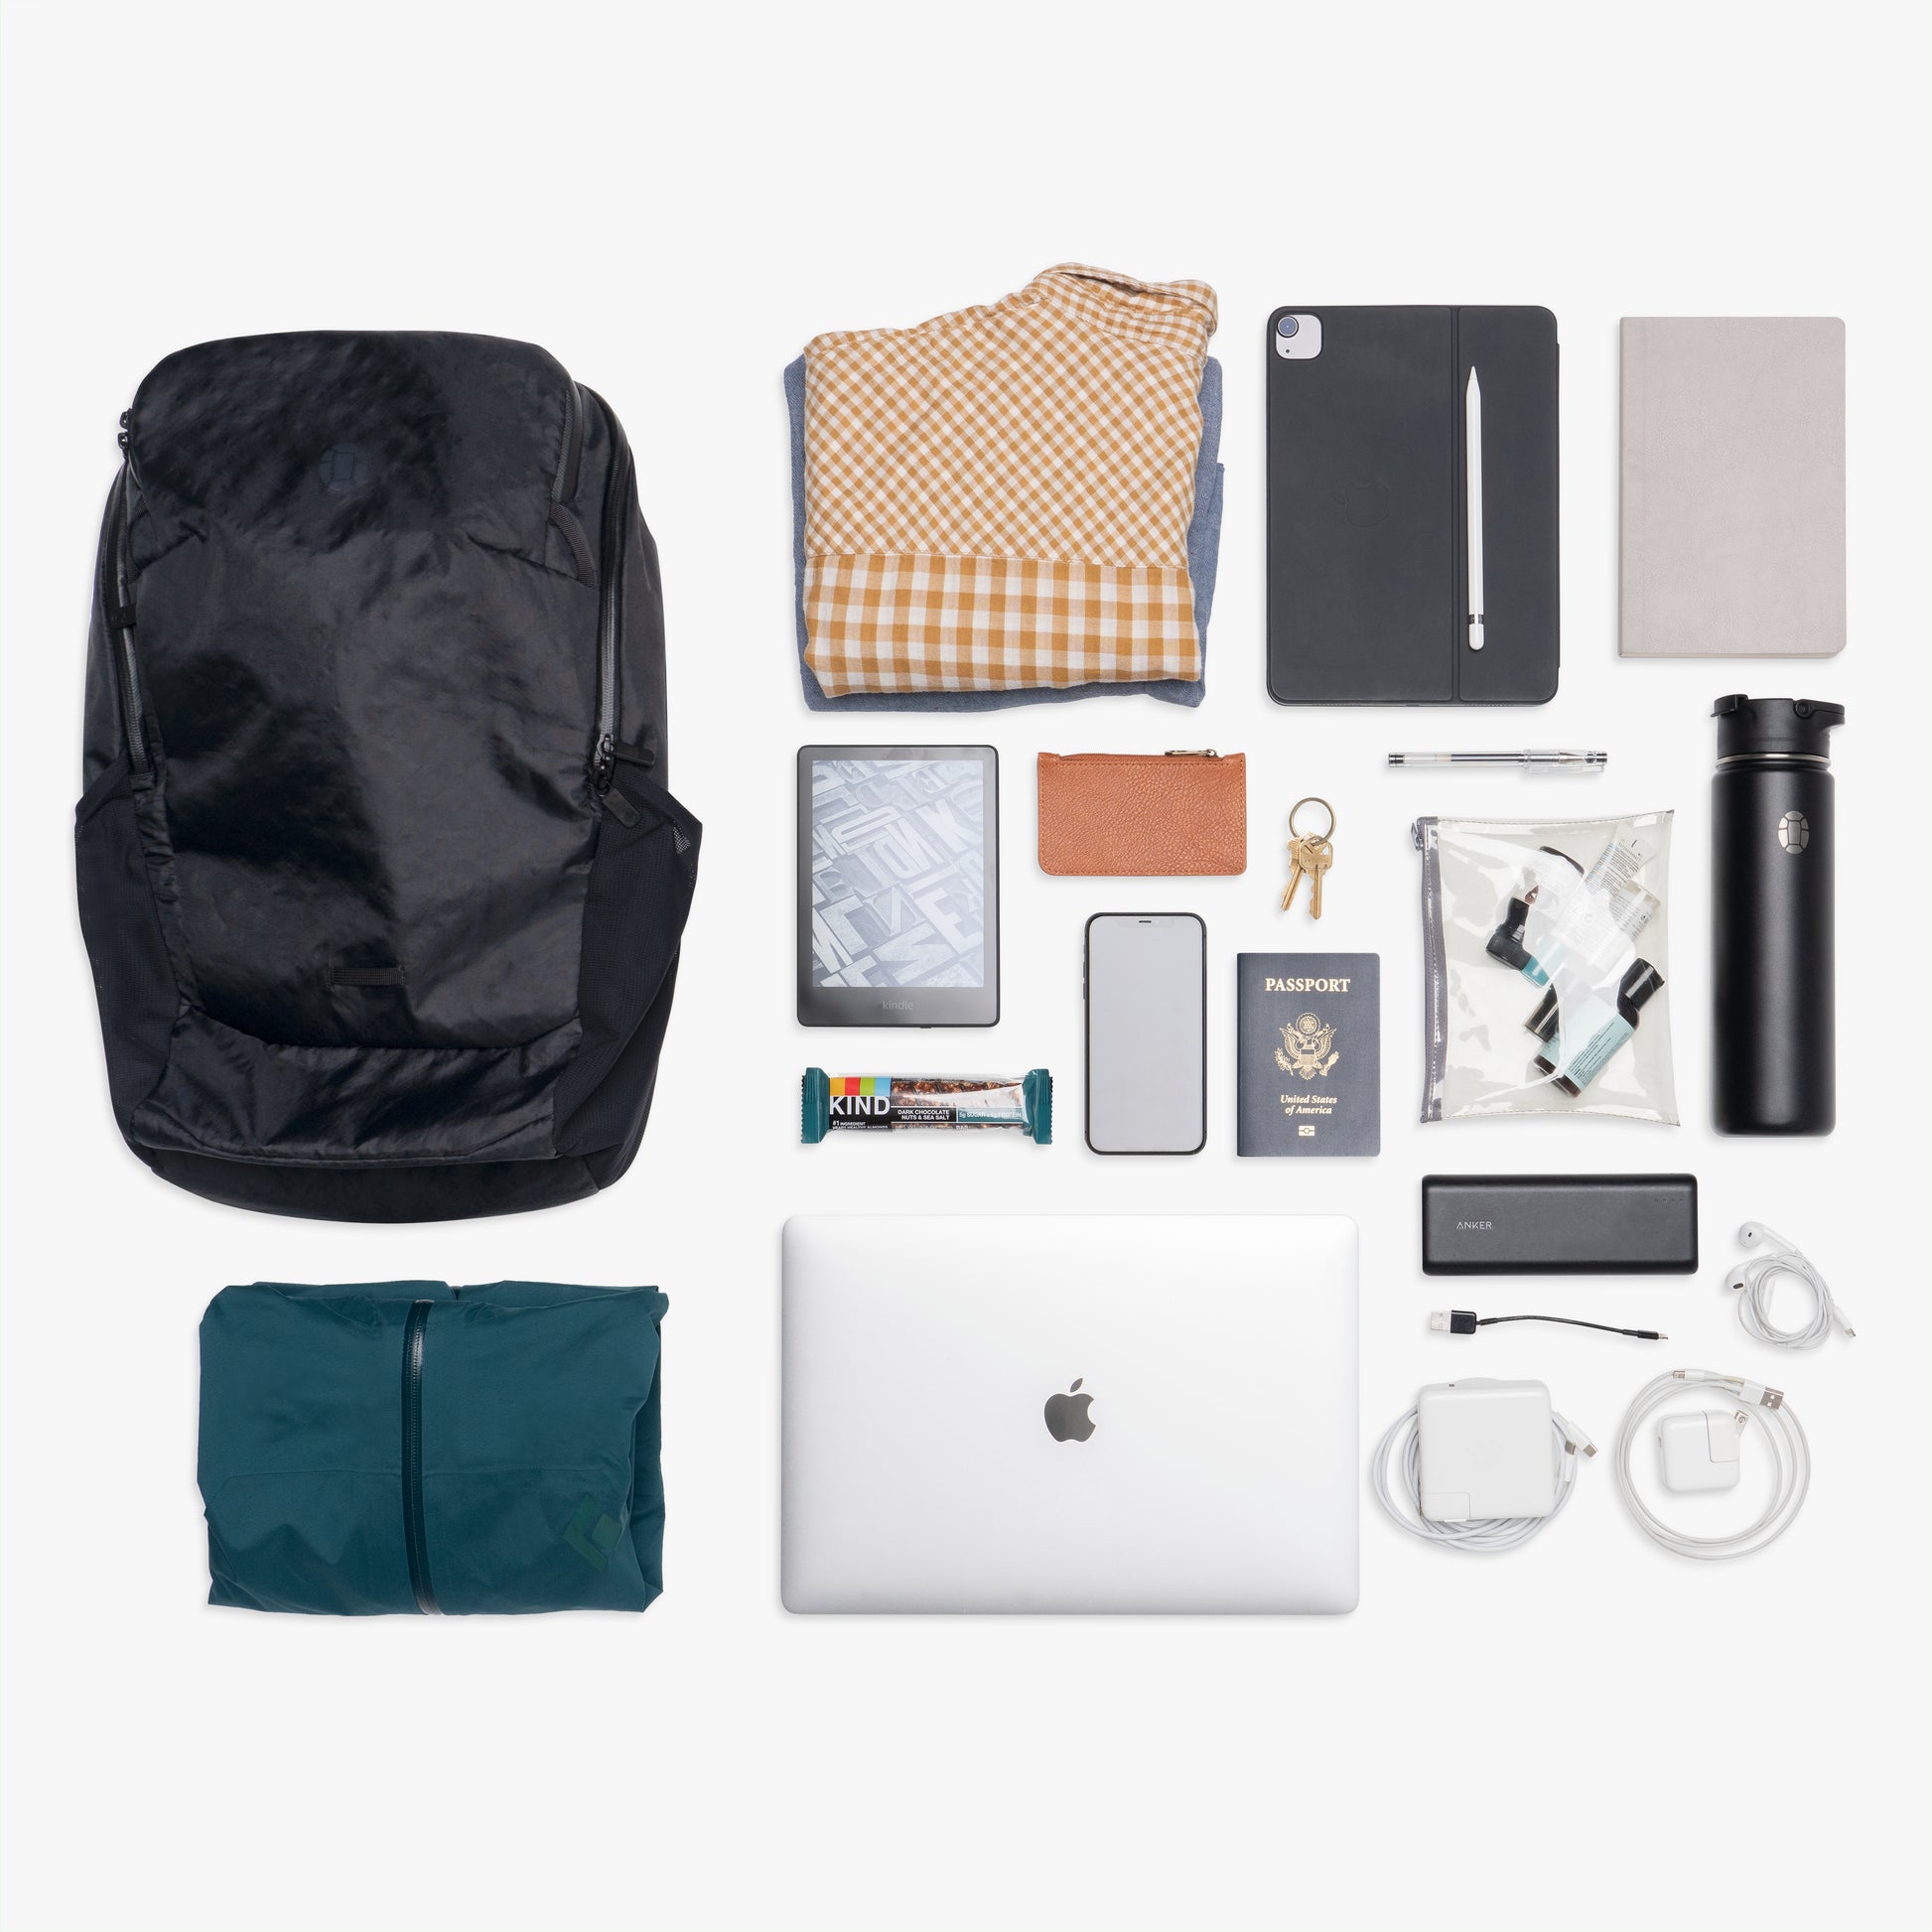 Fits all your in-flight essentials